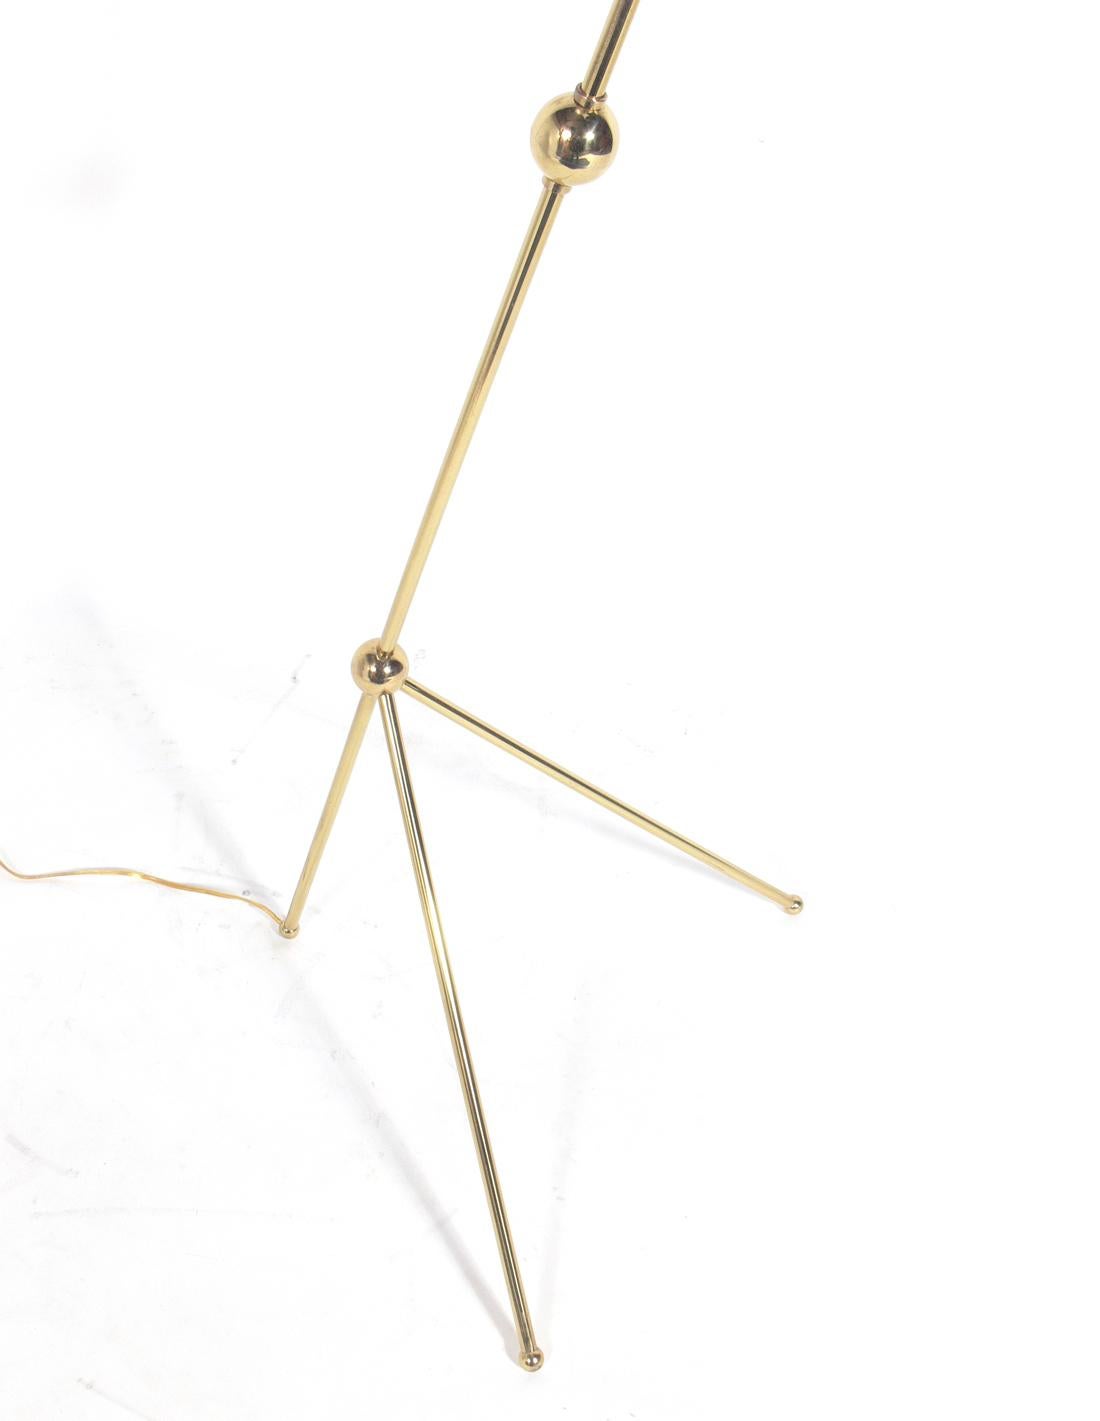 Sculptural Italian floor lamp, attributed to Stilnovo, American, circa 1950s. Cone shade swivels and has bulbs on both ends. The brass has been polished and lacquered. Rewired and ready to use.